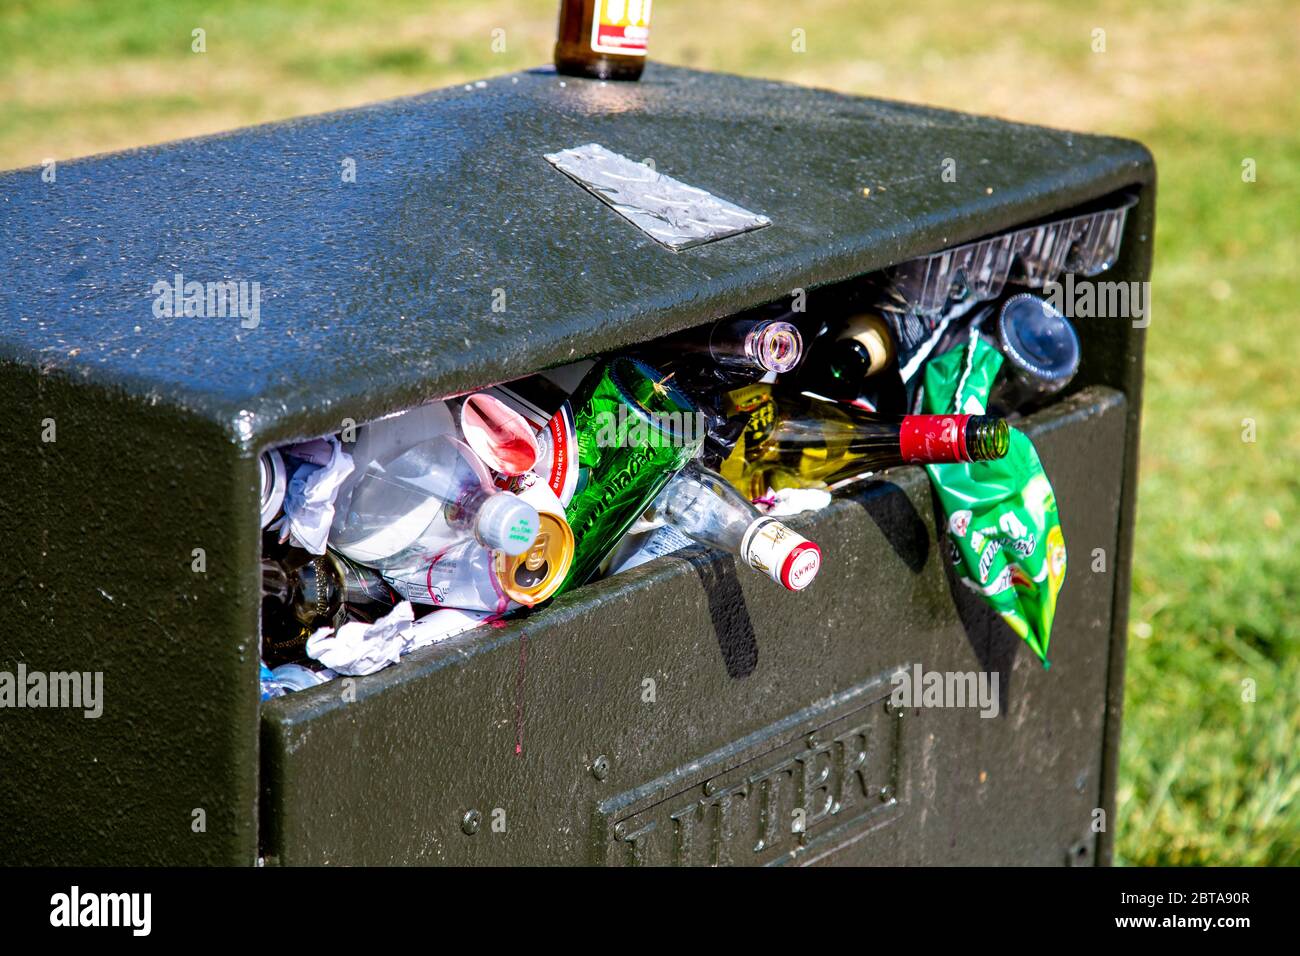 A litter bin in a park overflowing and full of rubbish (Battersea Park, London, UK) Stock Photo